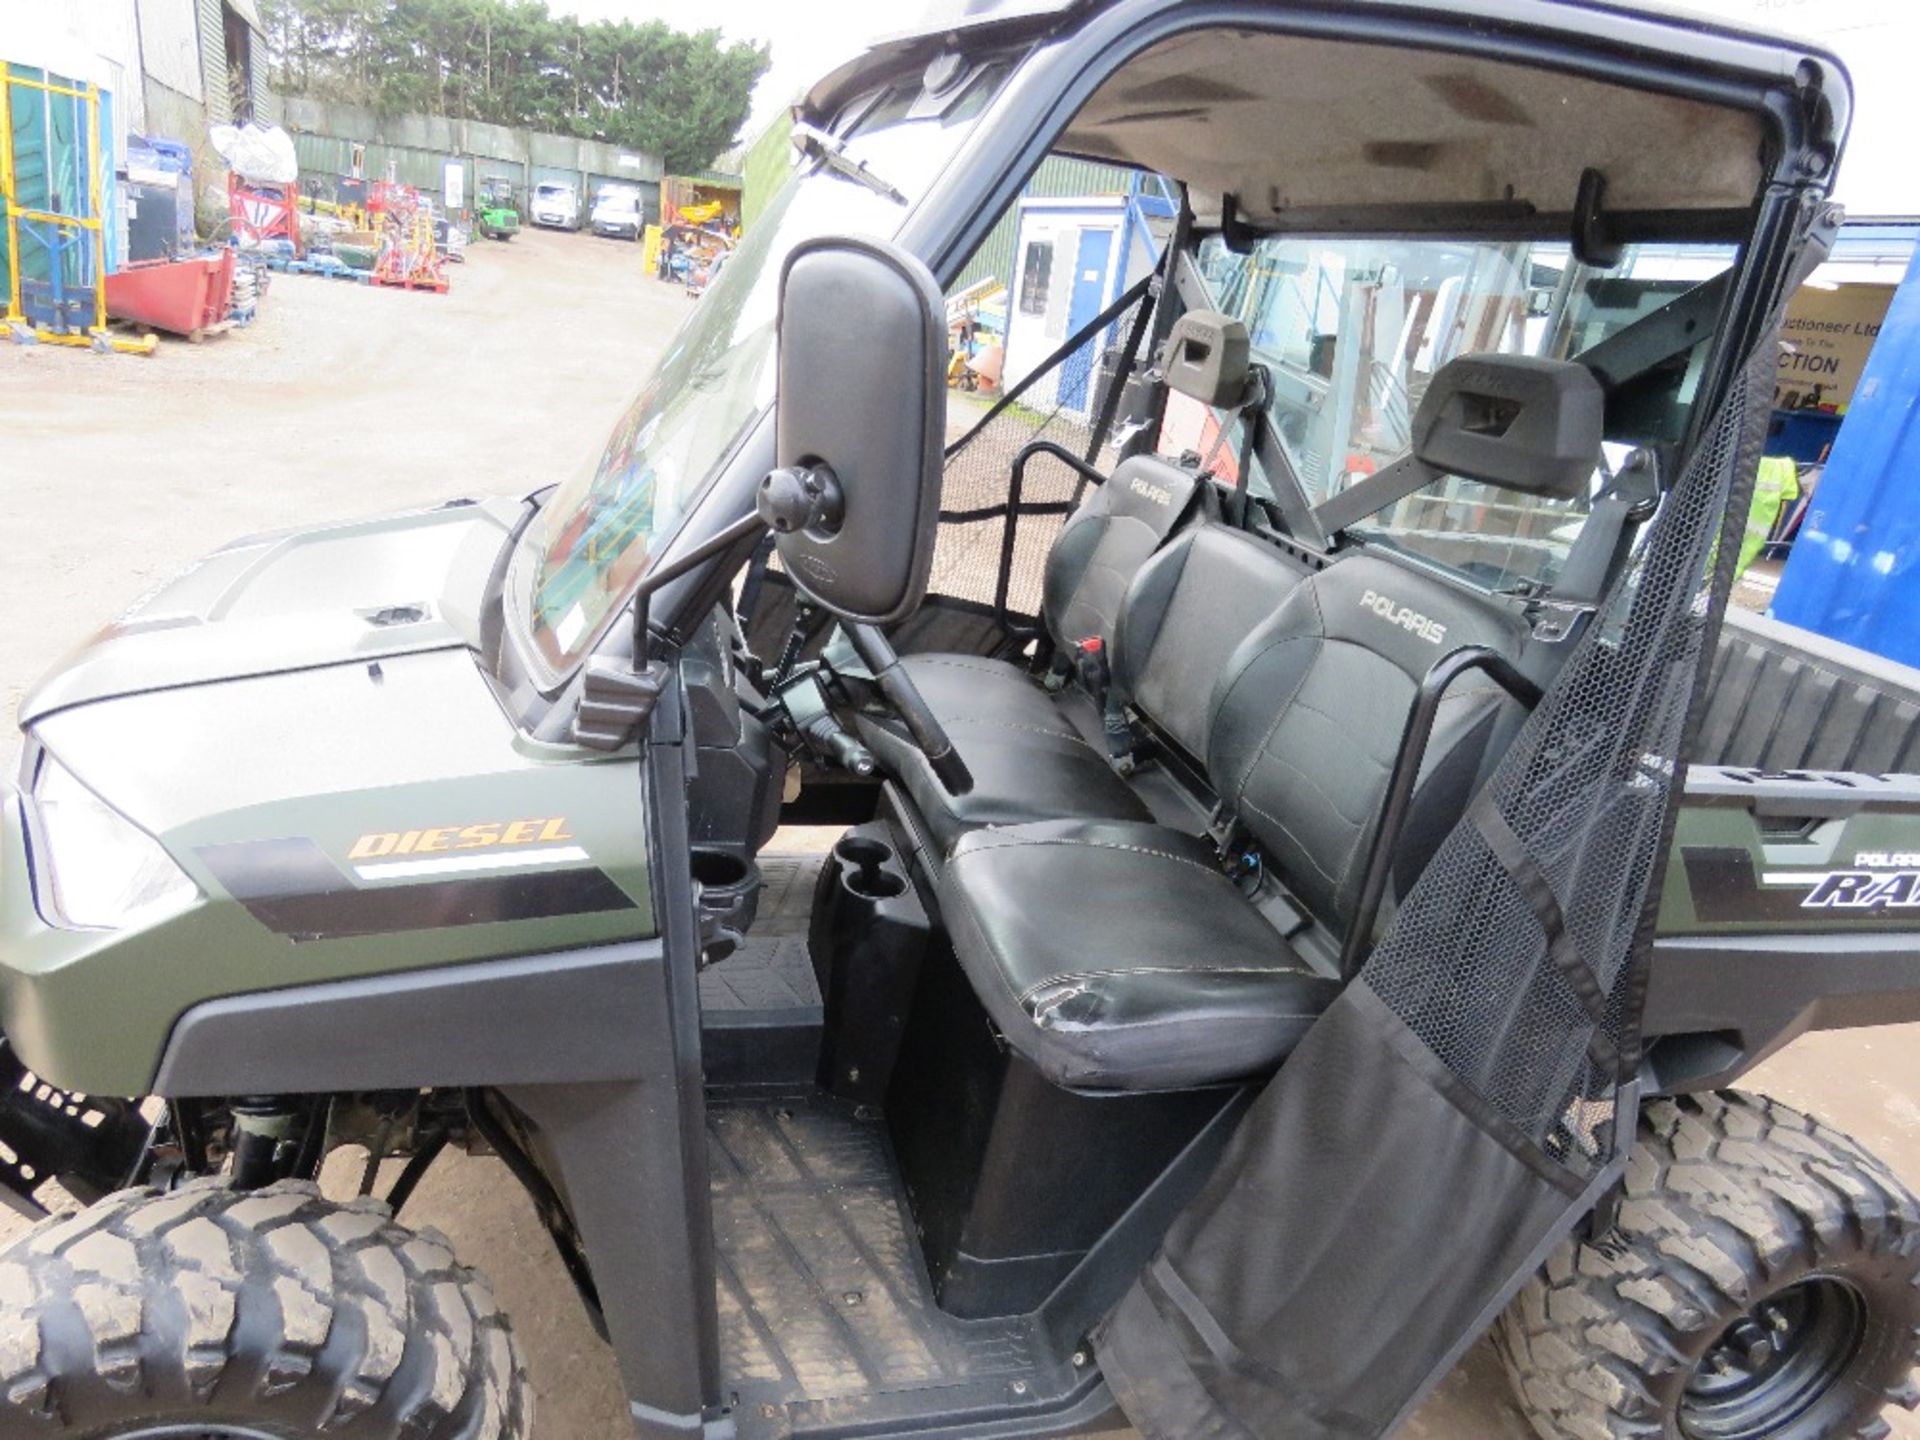 POLARIS 902 DIESEL RANGER WITH KUBOTA ENGINE, SCREEN ROOF AND BACK WINDOW. REG:EX71 RZA WITH V5, FIR - Image 11 of 12